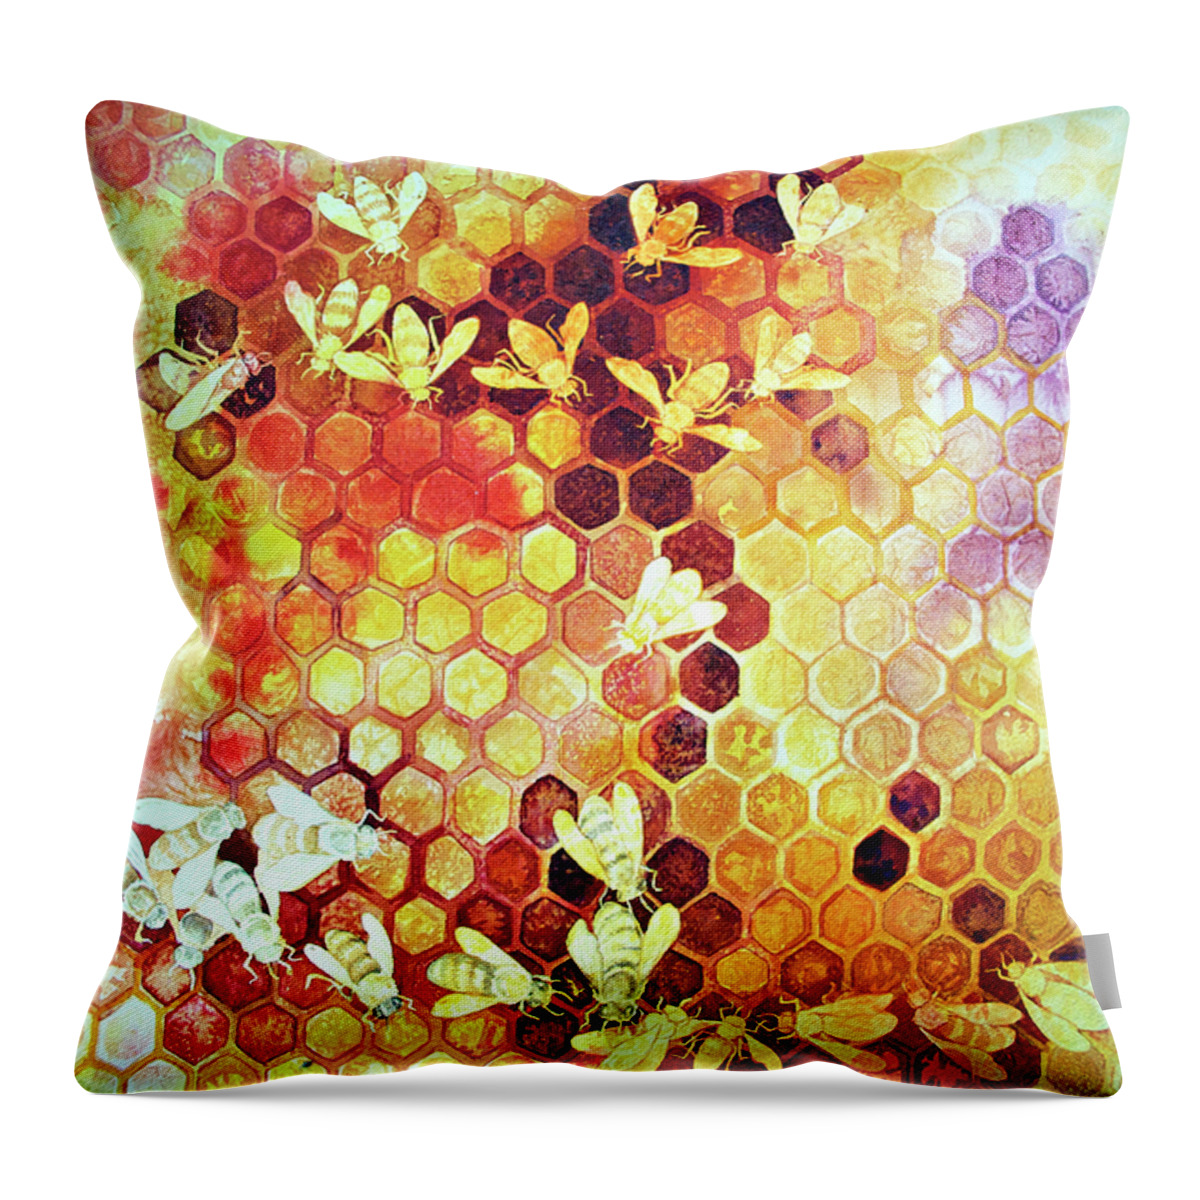  Throw Pillow featuring the New Upload #5 by Helen Klebesadel